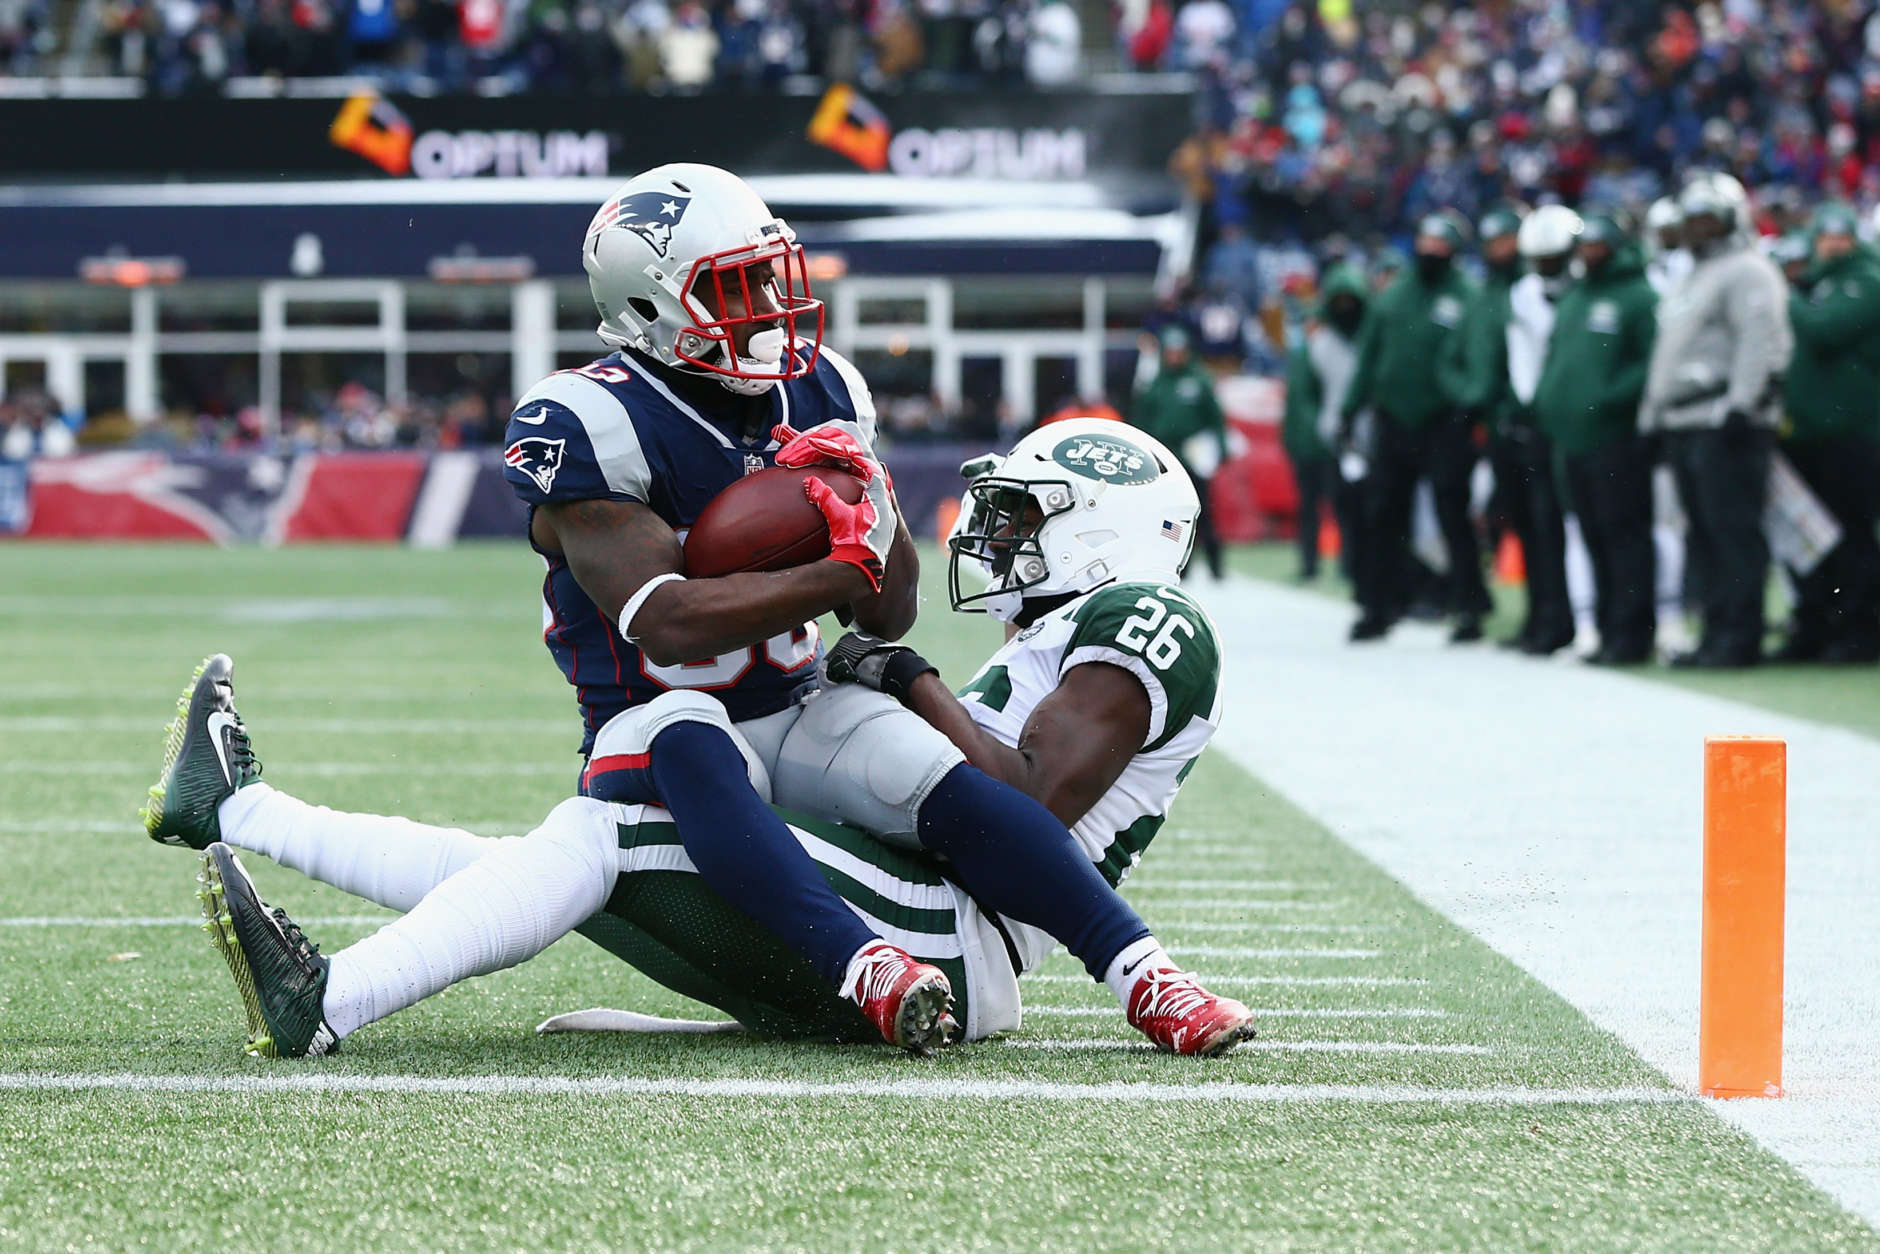 FOXBORO, MA - DECEMBER 31:  Dion Lewis #33 of the New England Patriots rushes for a 3-yard touchdown as Marcus Maye #26 of the New York Jets attempts to tackle him during the first quarter at Gillette Stadium on December 31, 2017 in Foxboro, Massachusetts.  (Photo by Maddie Meyer/Getty Images)